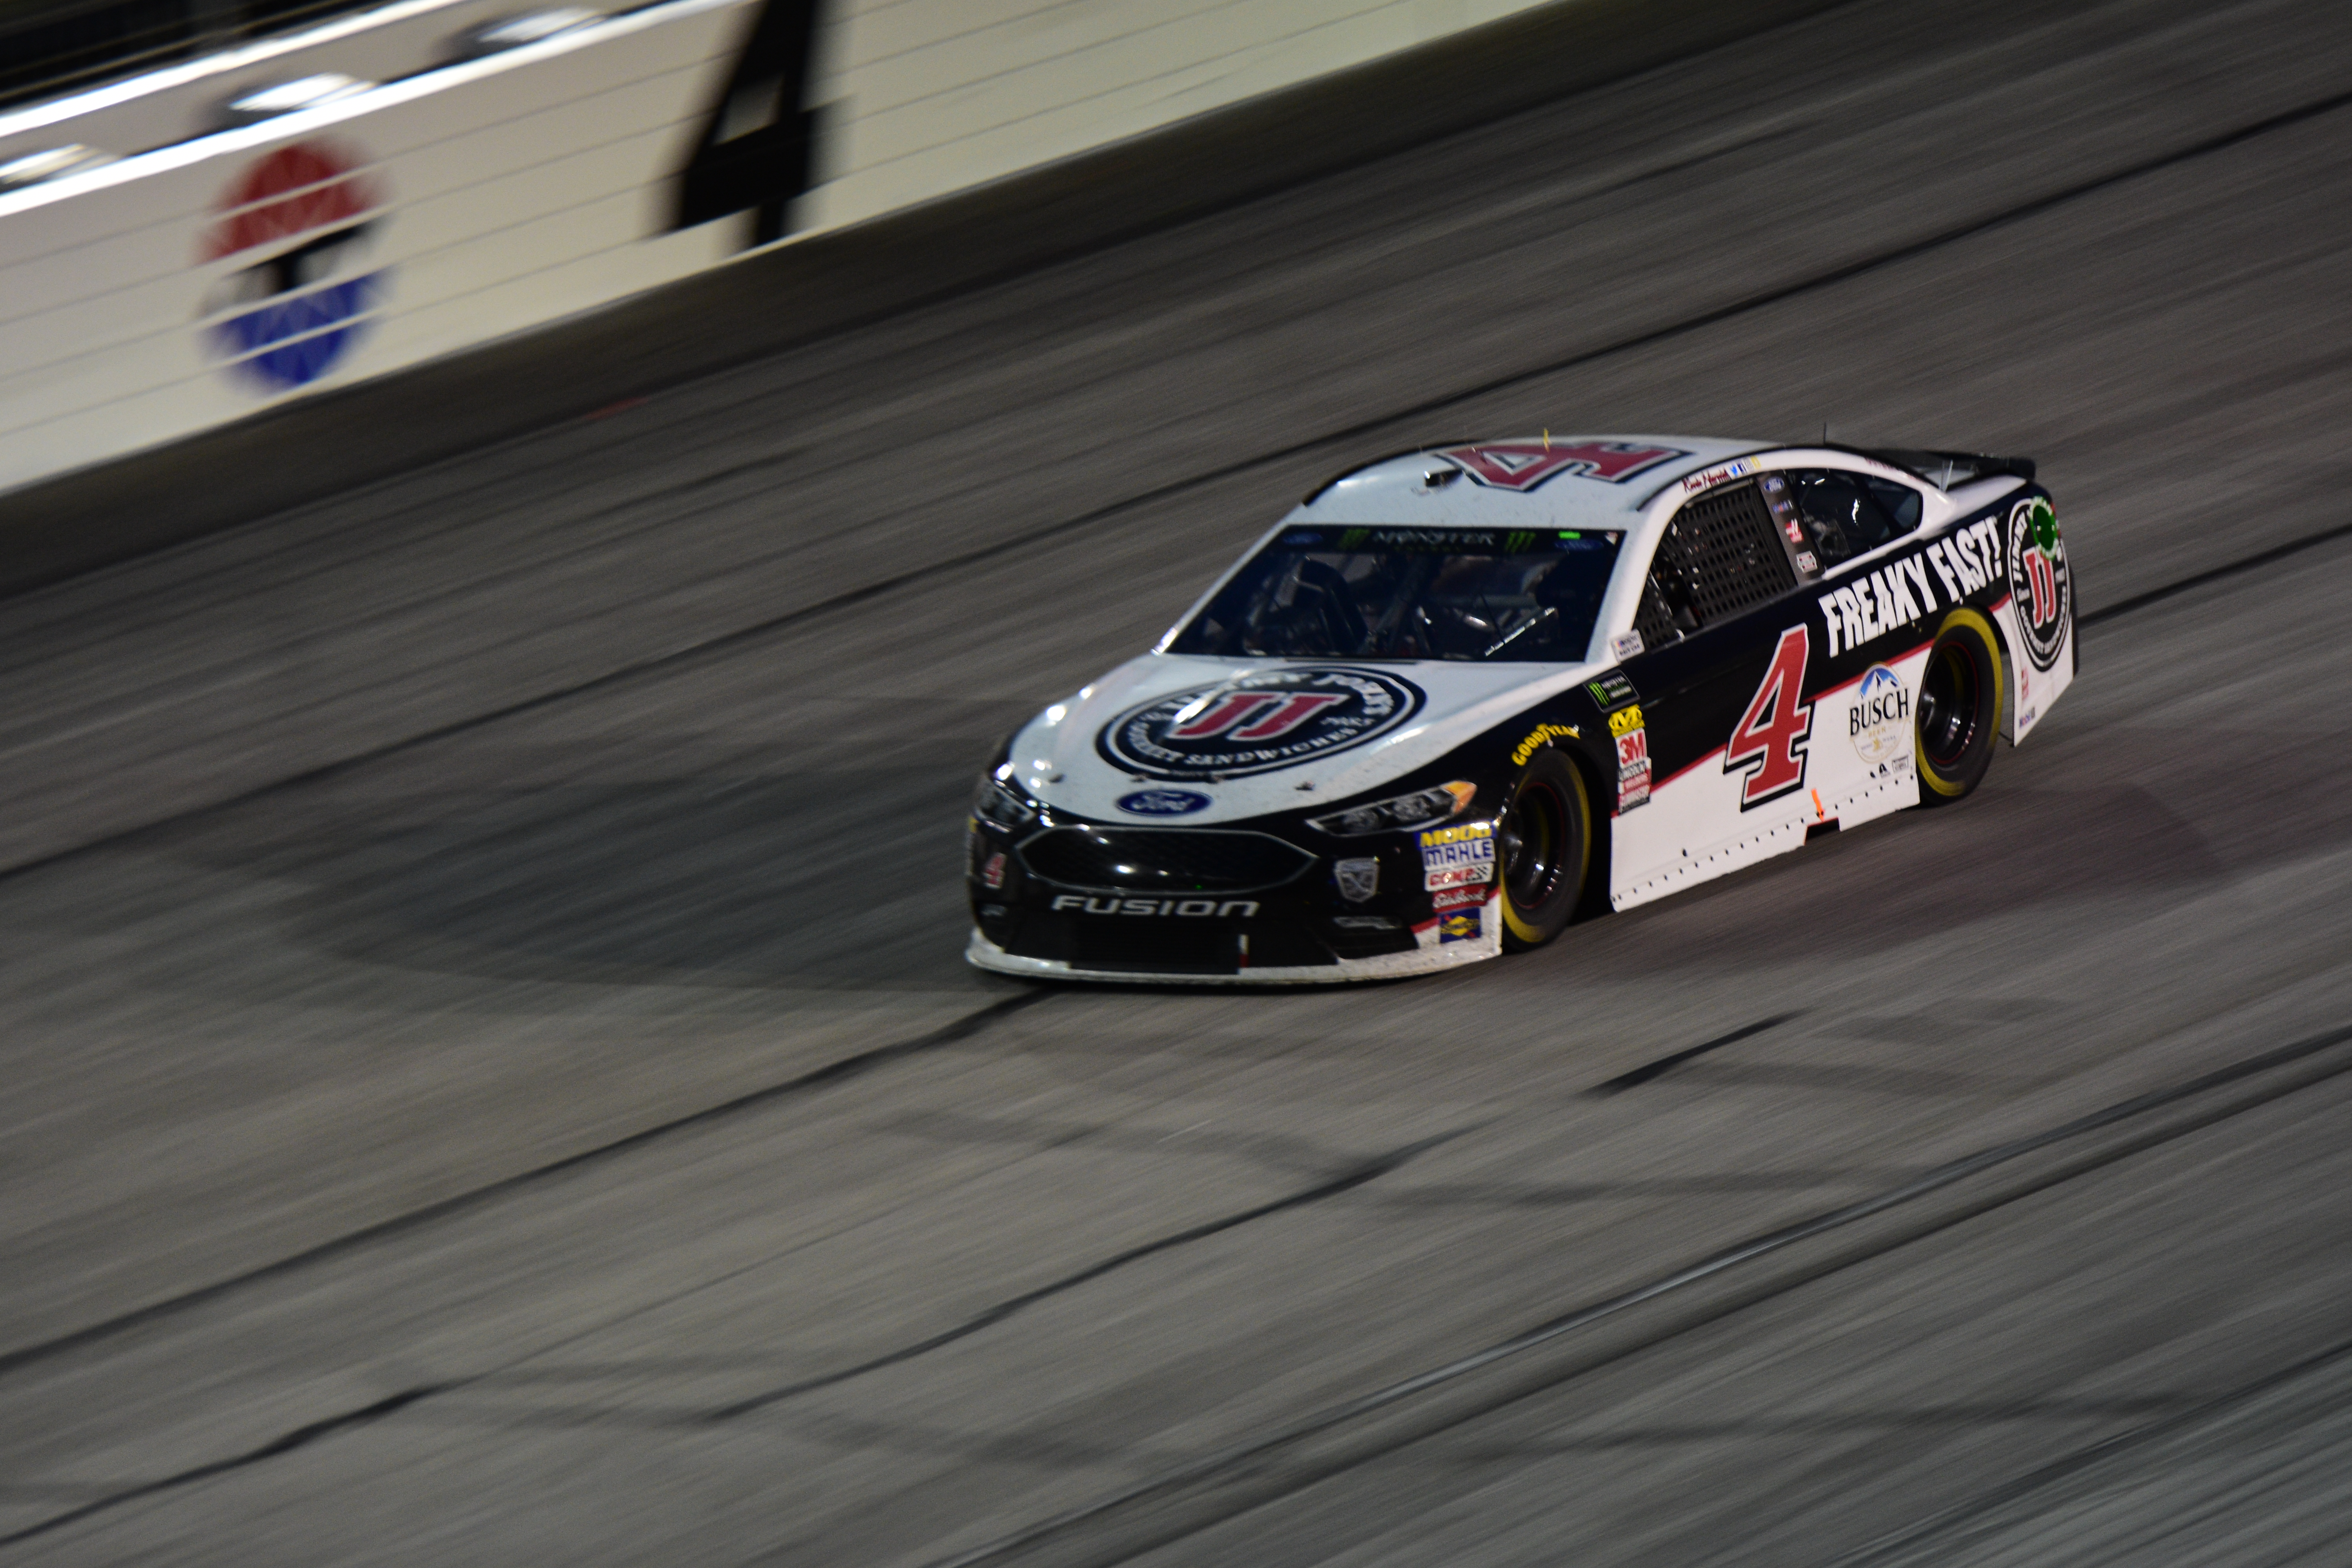 Like Ron Swanson, Kevin Harvick, at least his car, is quite modest about its speed! (Photo Credit: Zach Darrow/TPF)